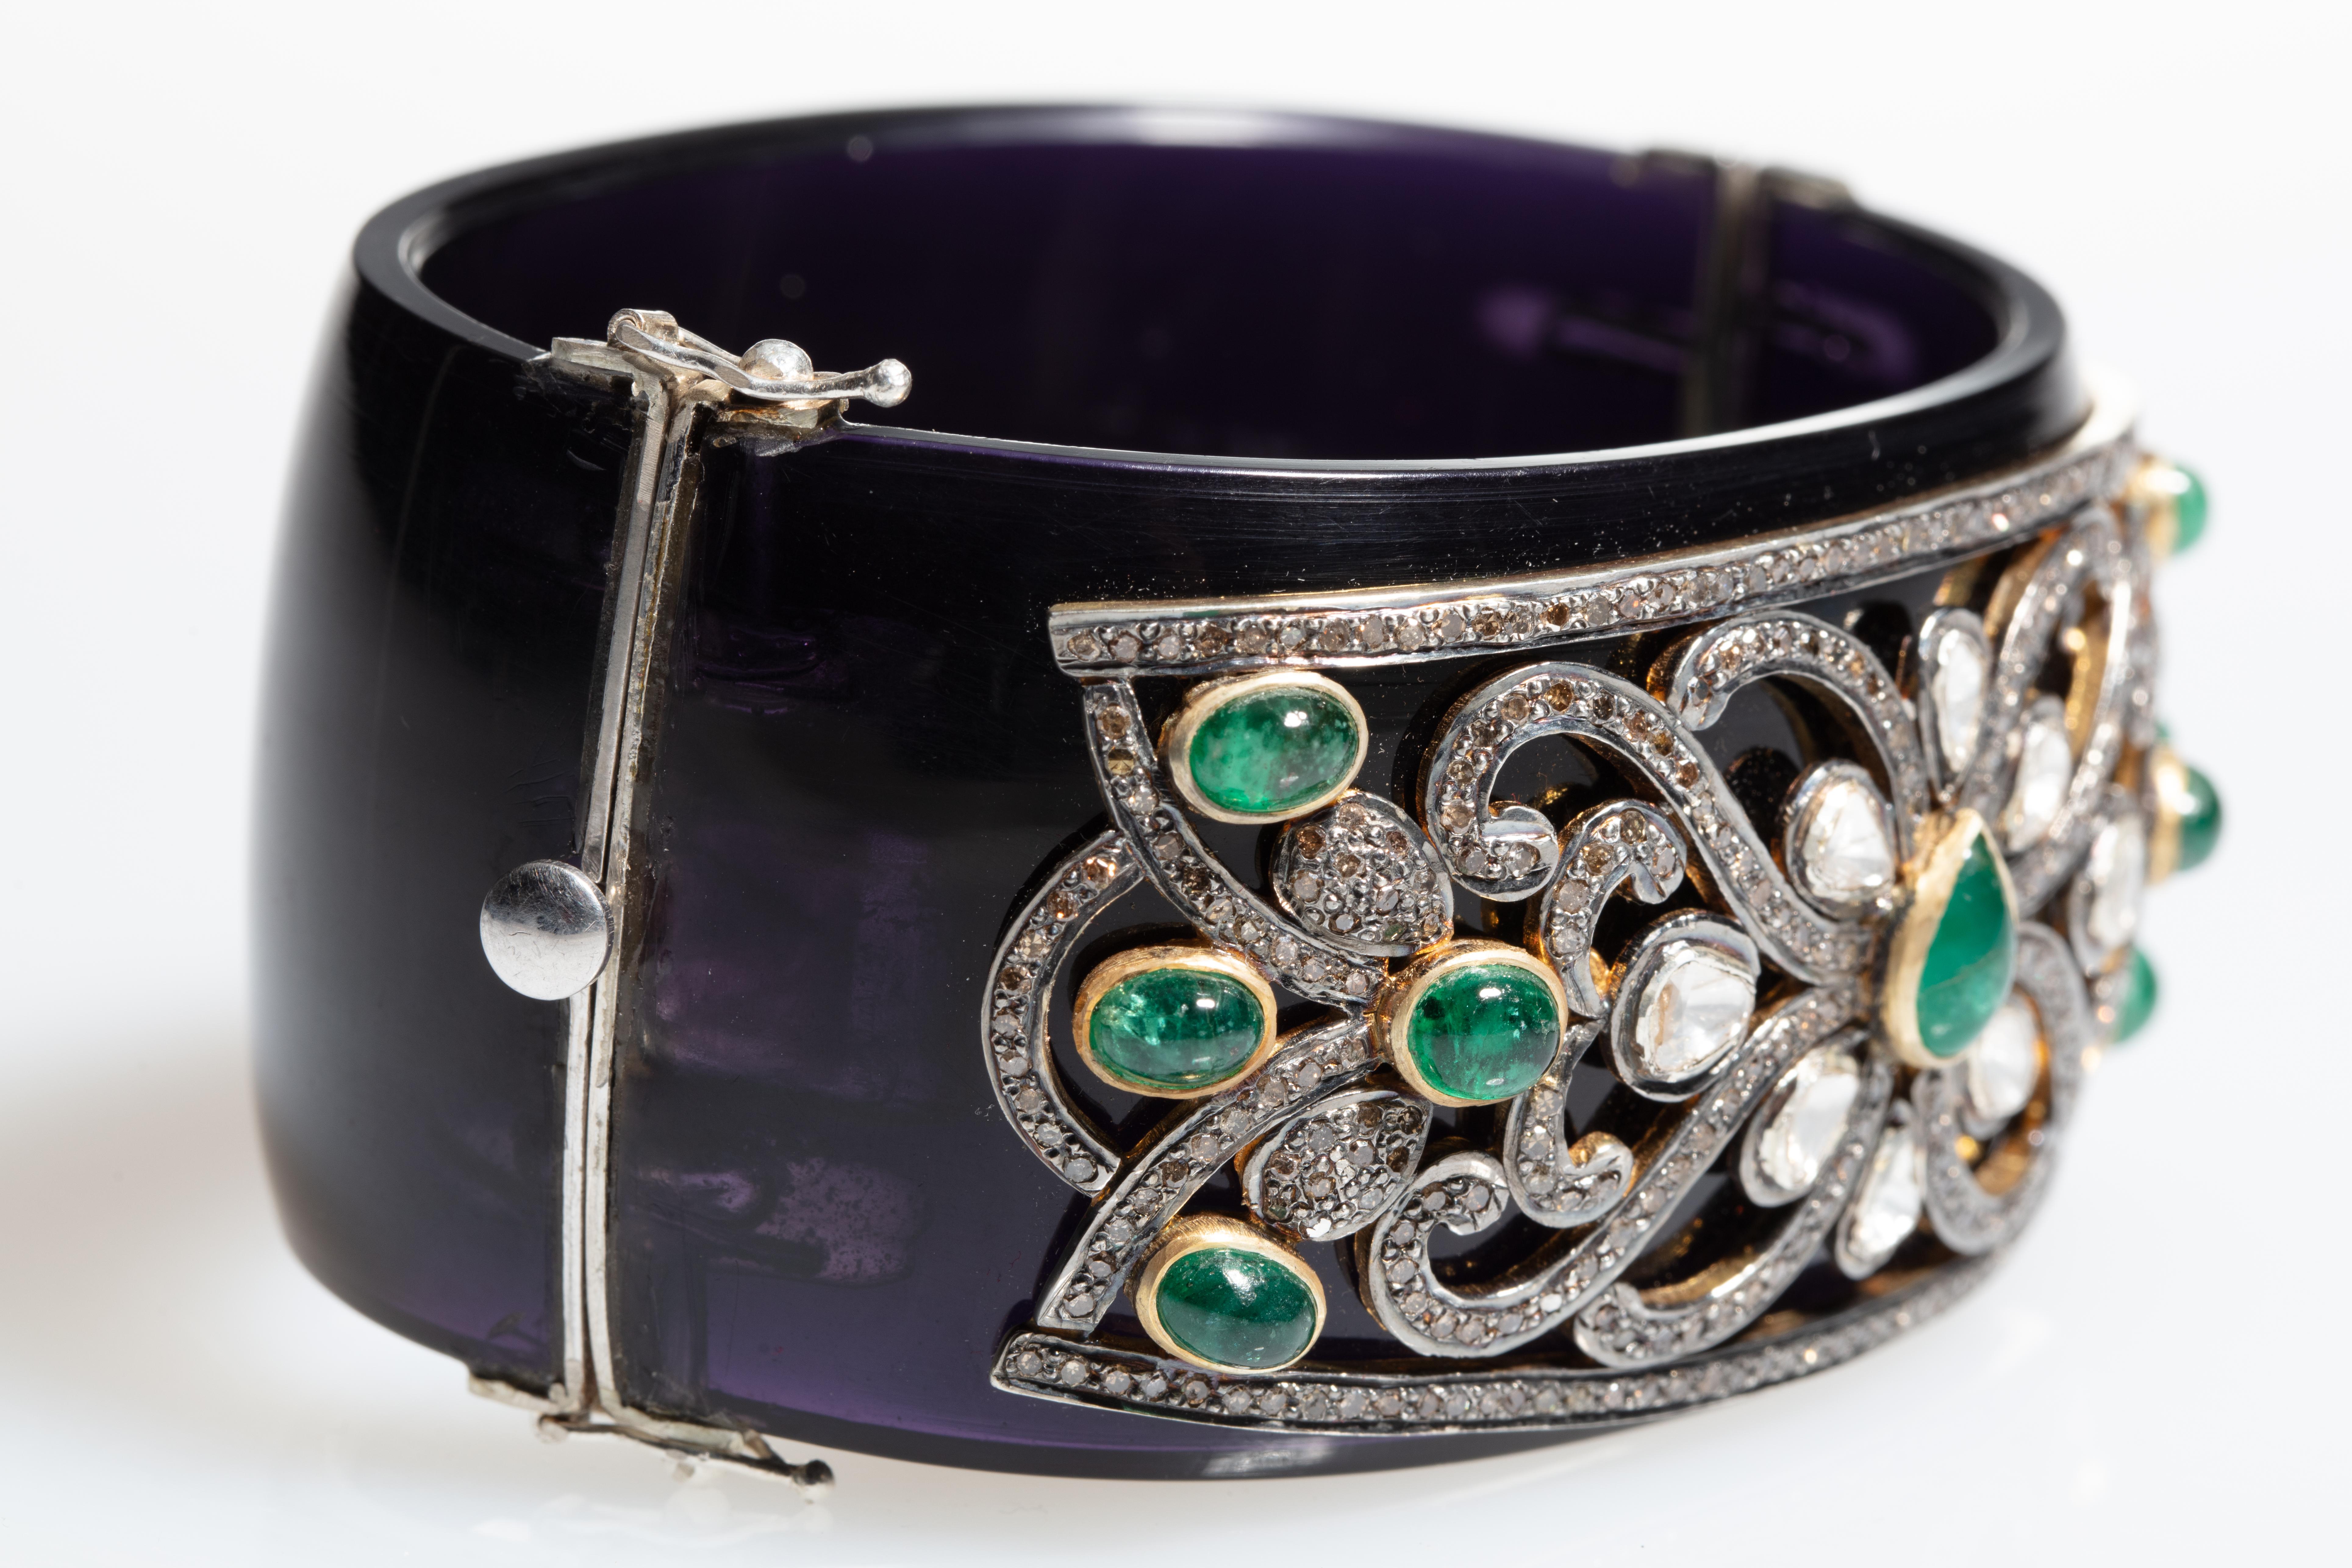 A wide (1.5 inches) cuff bracelet in black Bakelite with rosecut diamonds and brilliant-cut pave`-set diamonds with 8 oval, cabochon emeralds and 1 center, pear-shaped cabochon emerald-- set in sterling silver.  Oval shape keeps the stones sitting